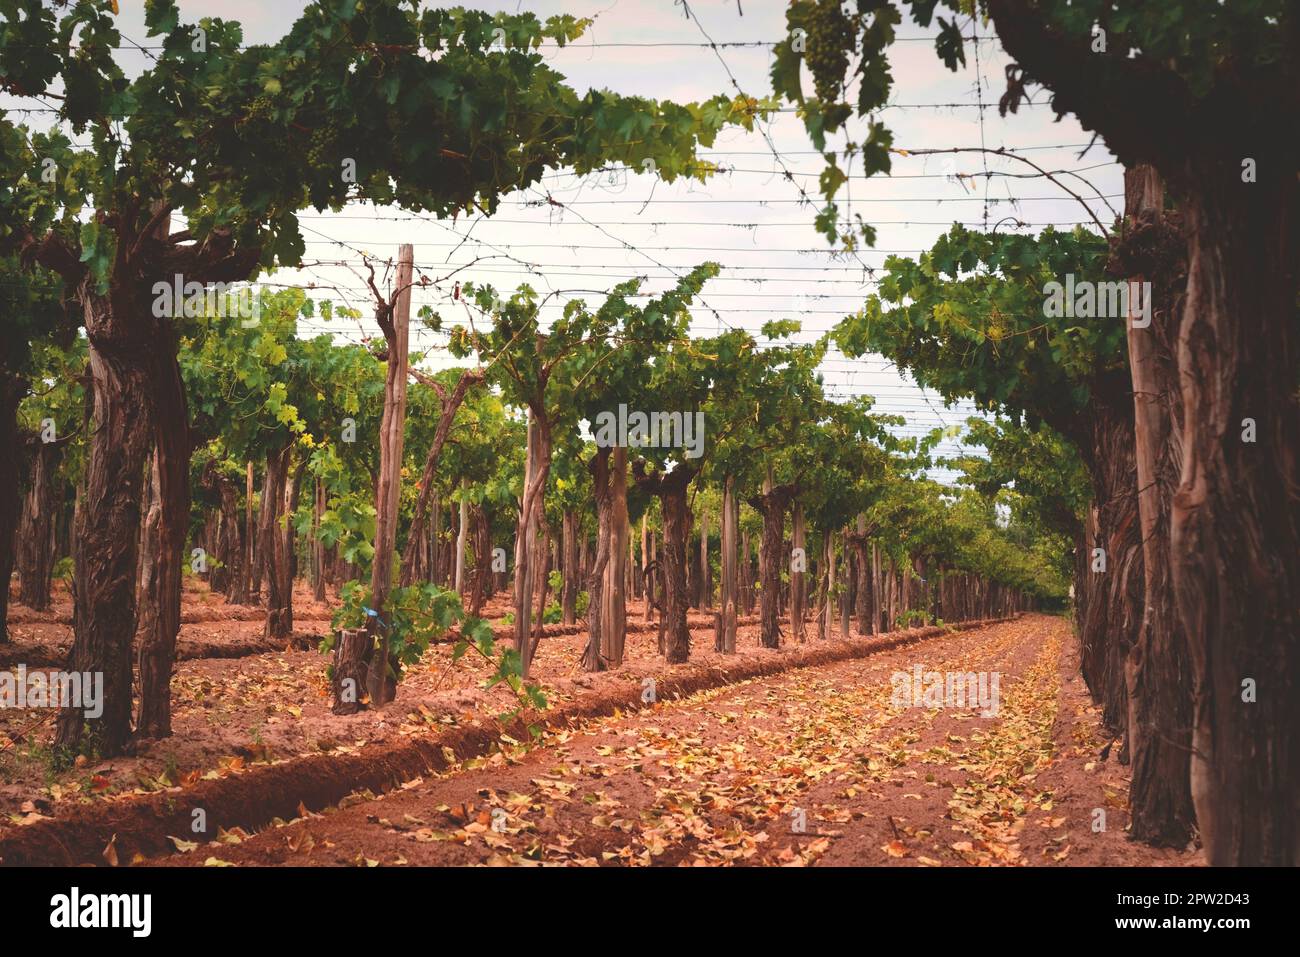 Grapevines on a vineyard estate in Mendoza, Argentina. Wine industry, agriculture background. Stock Photo